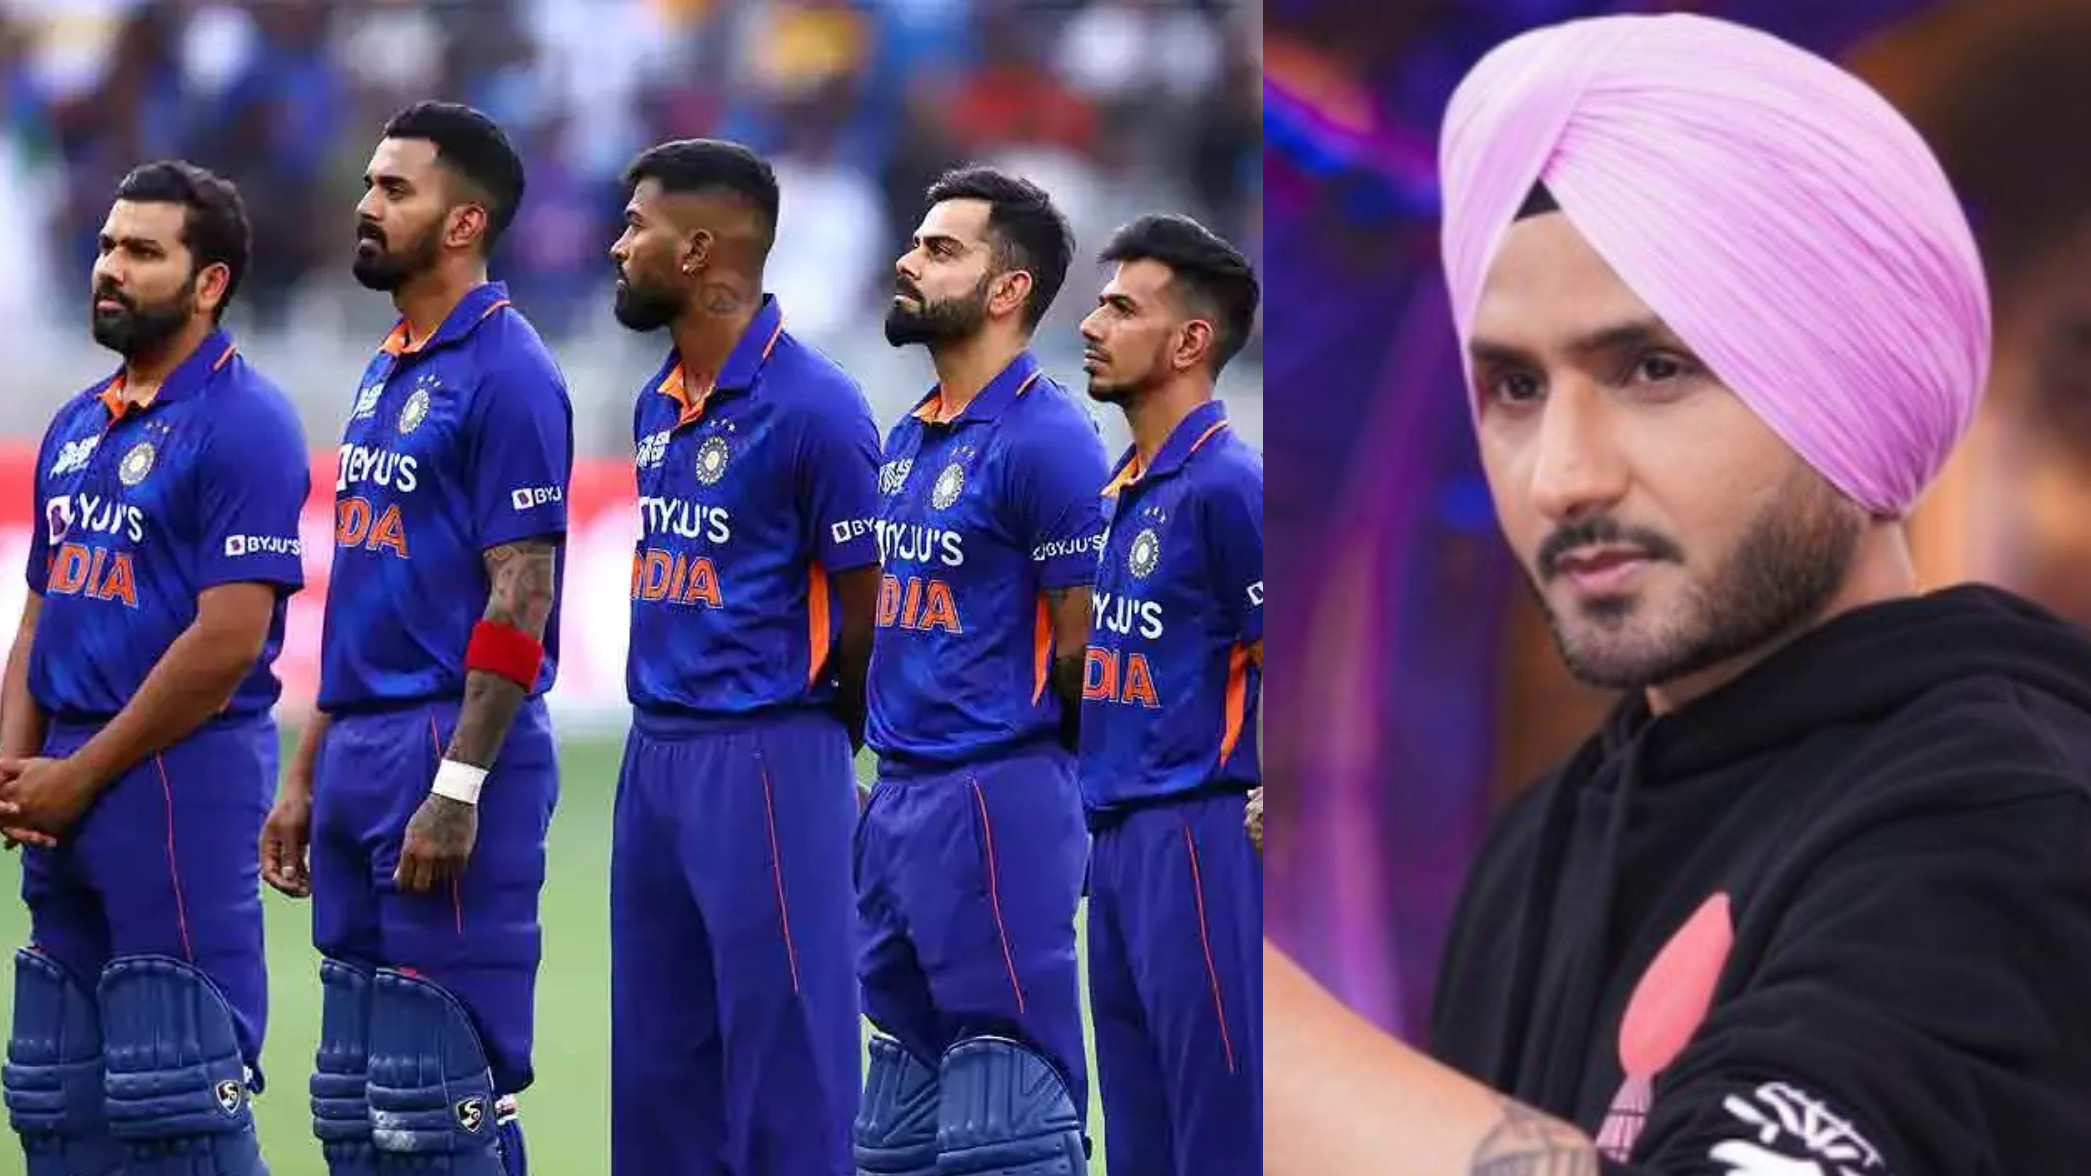 Indian team can have two coaches, bring in someone who understands T20 cricket- Harbhajan Singh